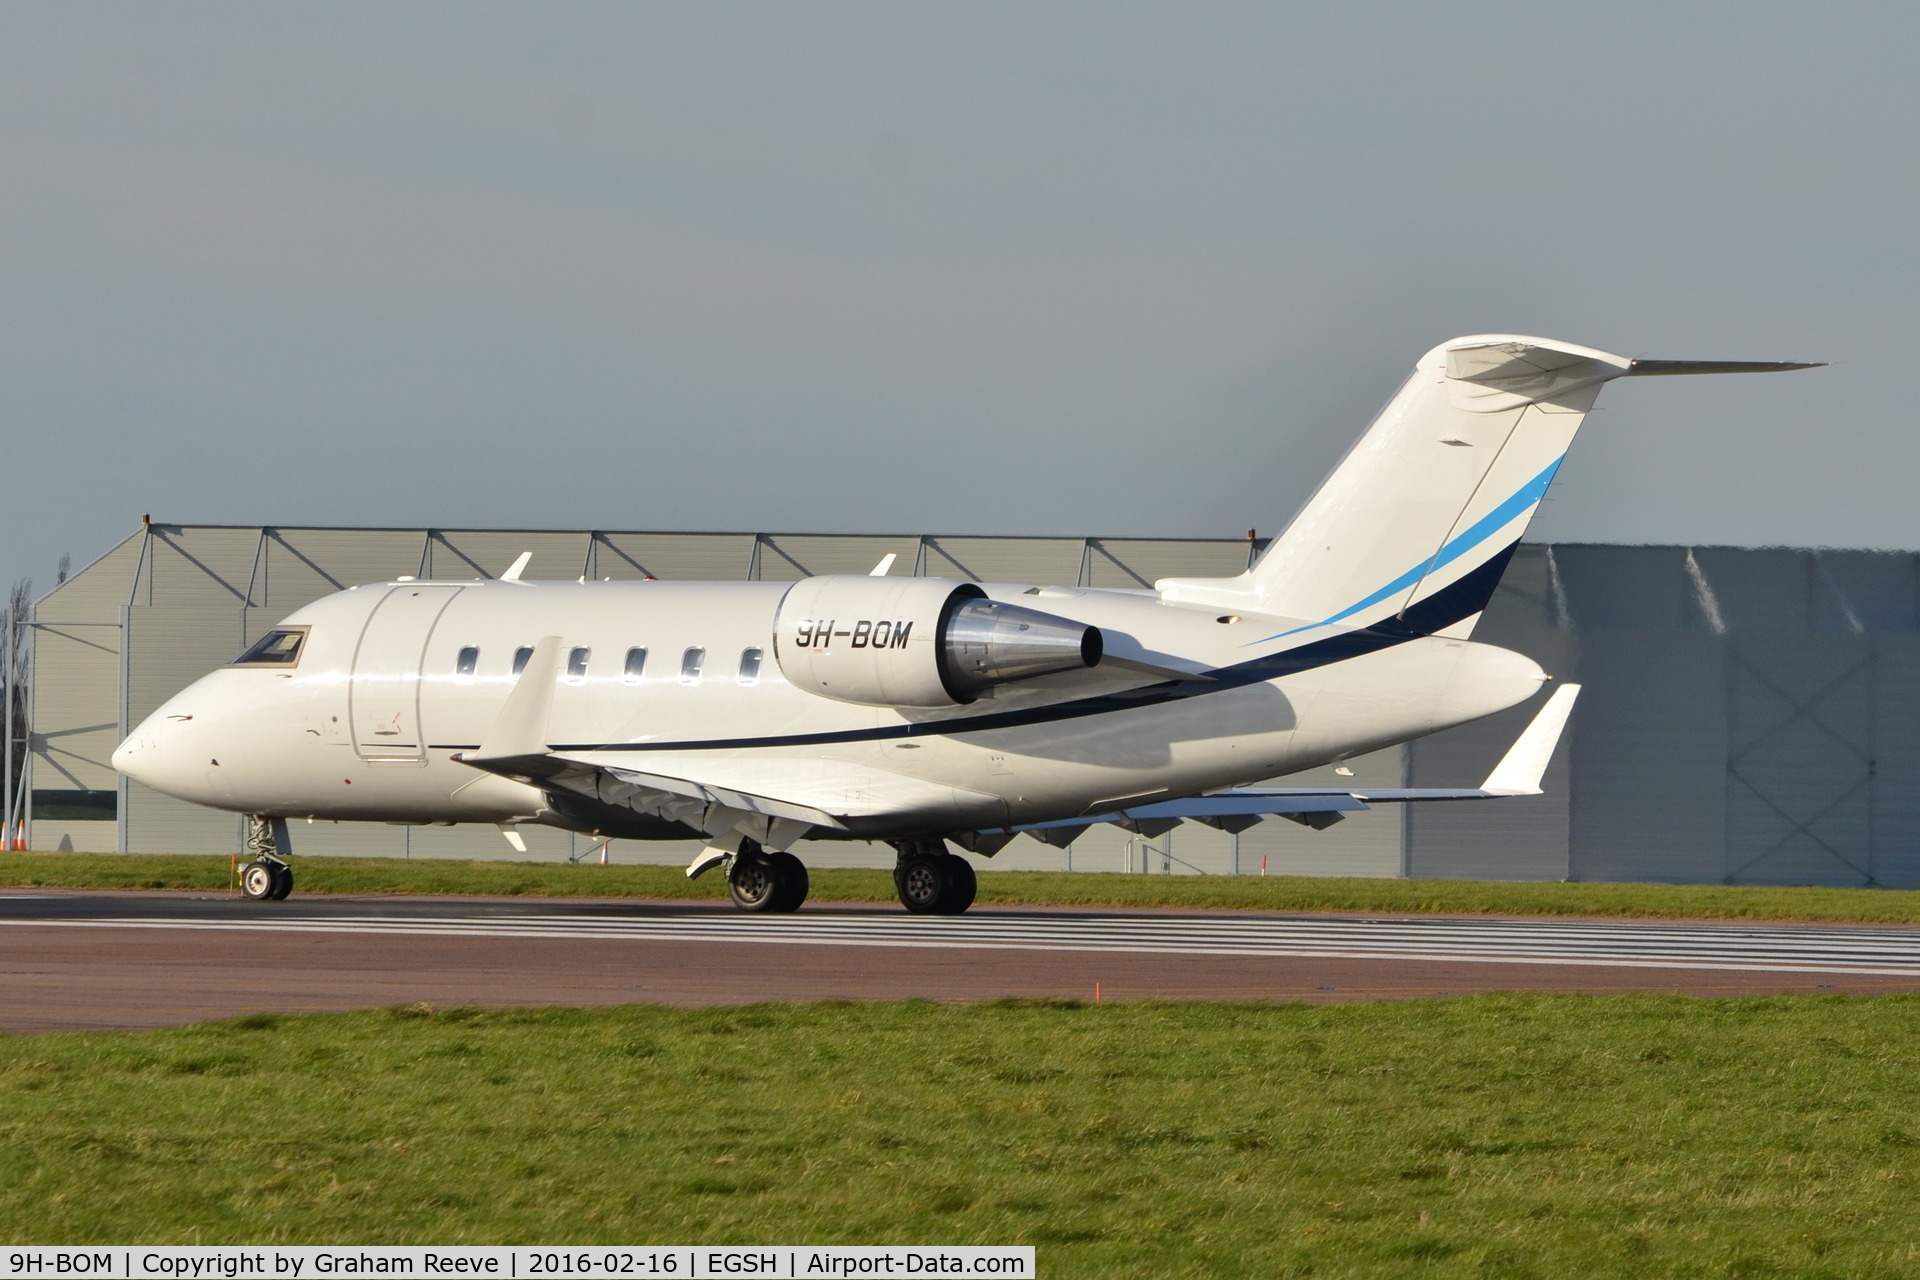 9H-BOM, 2009 Bombardier Challenger 605 (CL-600-2B16) C/N 5785, Departing from Norwich